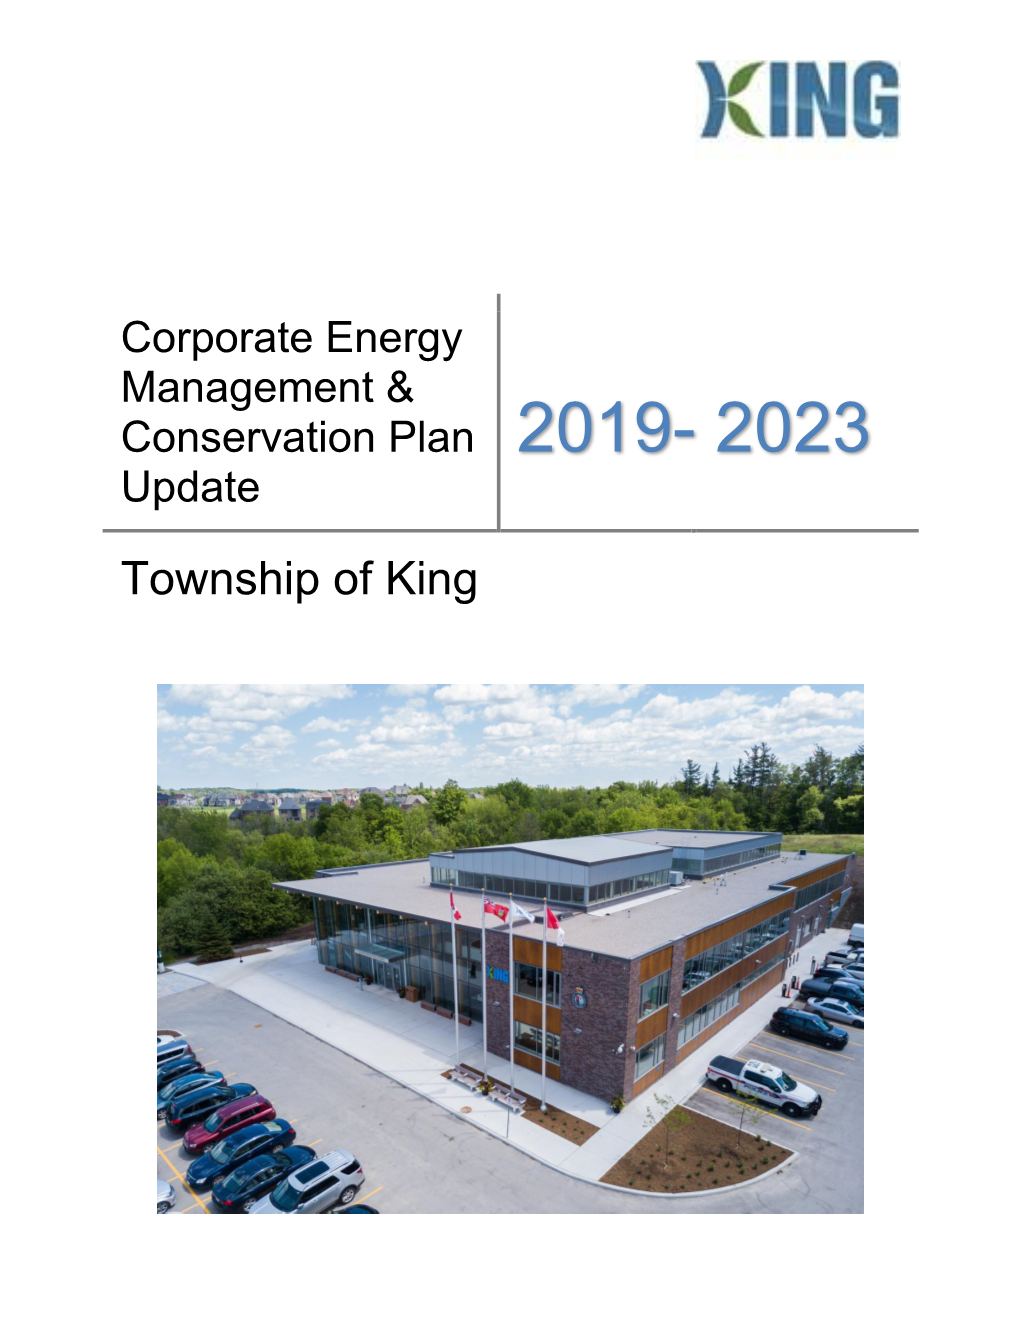 Corporate Energy Management & Conservation Plan Update